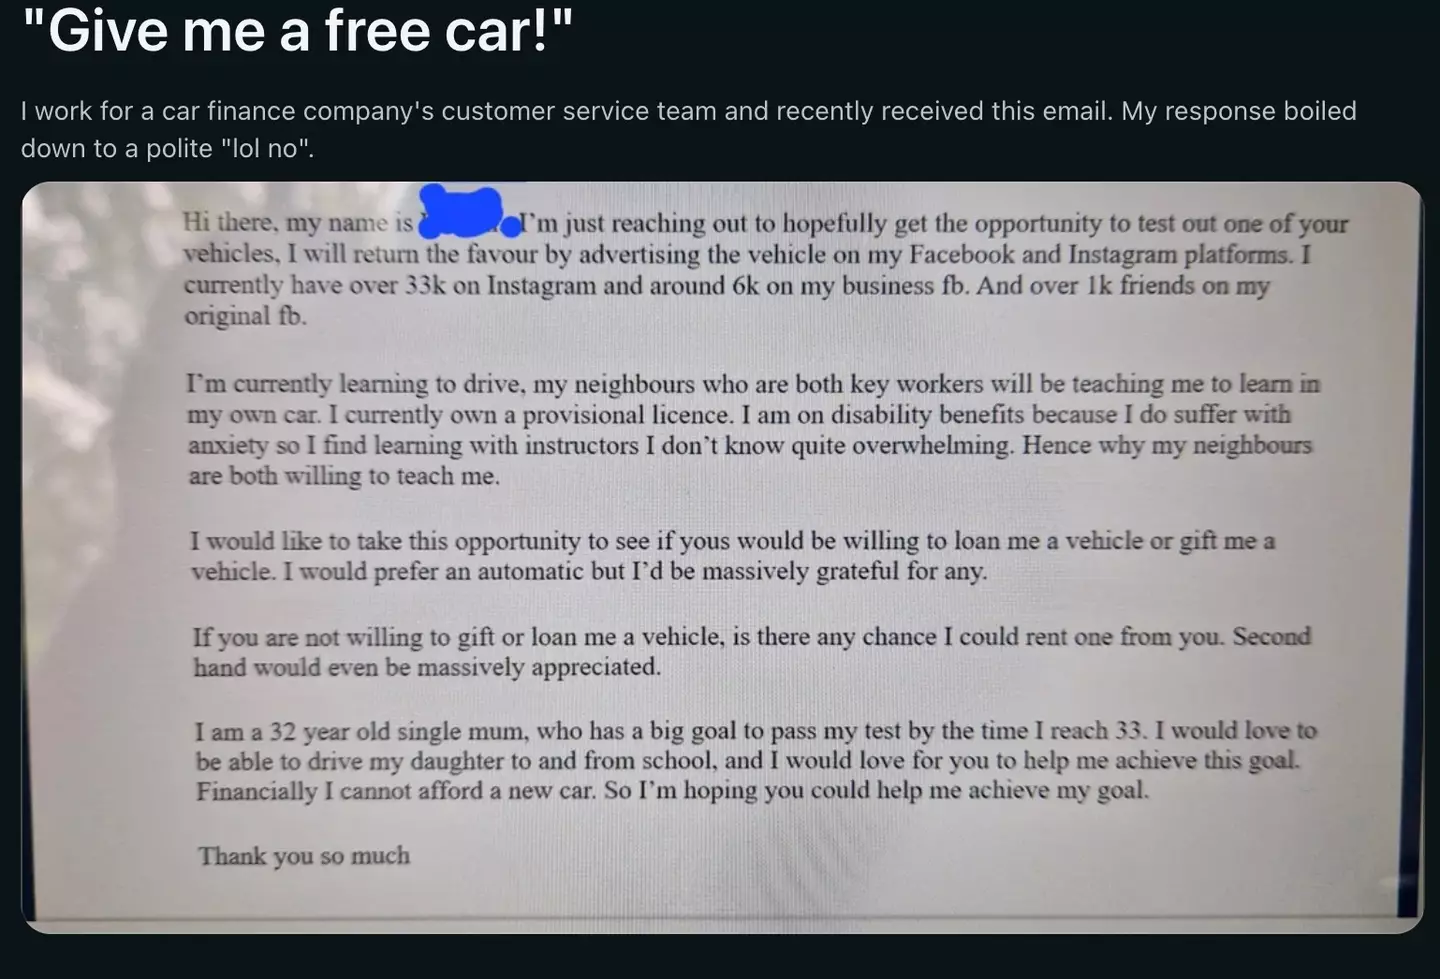 An influencer tried their luck at getting a free car.